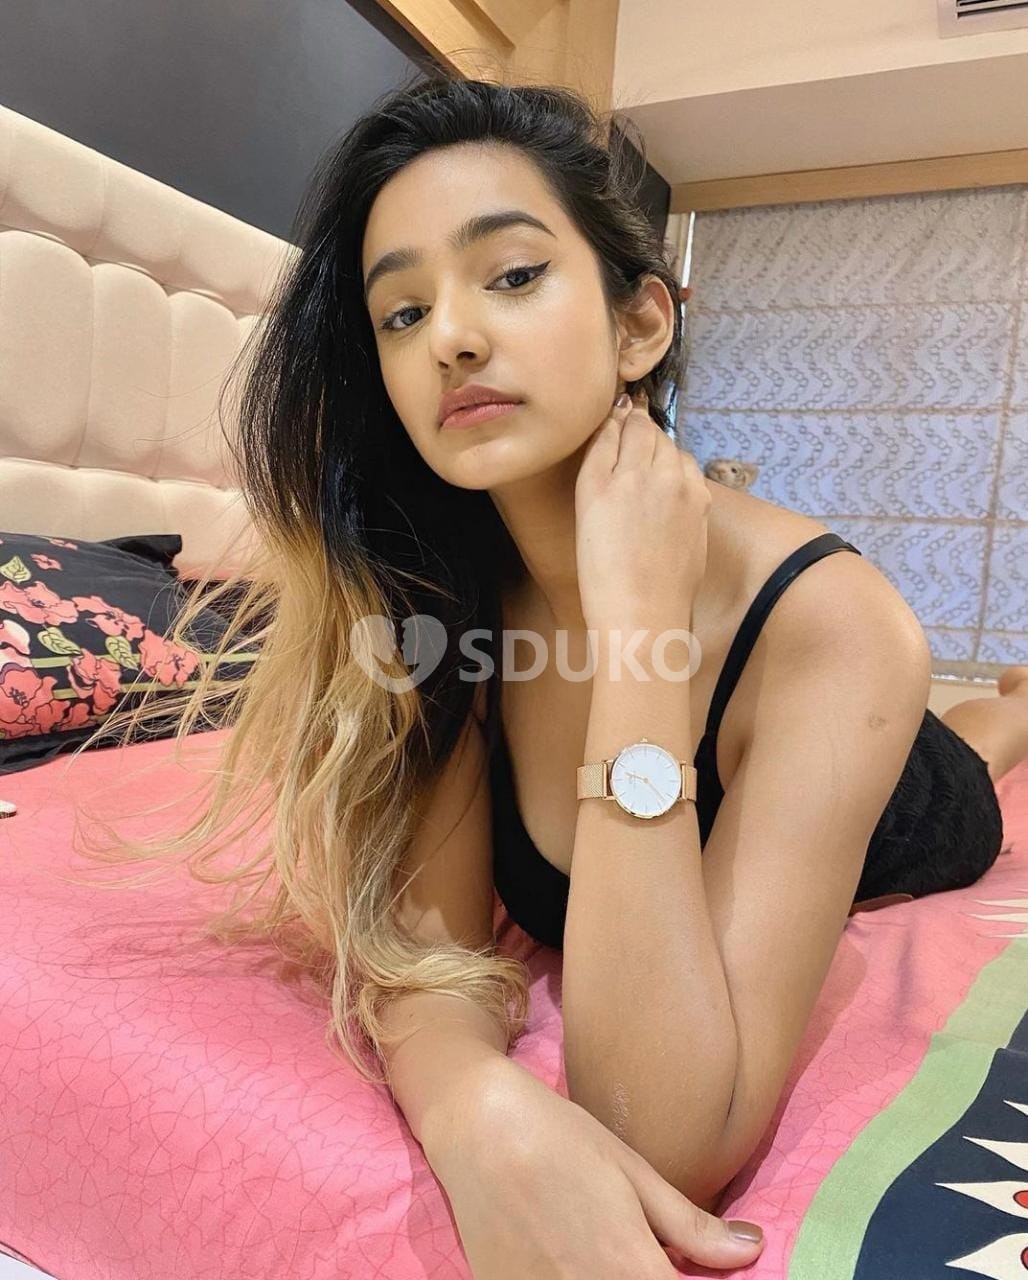 Andheri 👉 Low price 100%;::: genuine👥sexy VIP call girls are provided👌safe and secure service call 📞